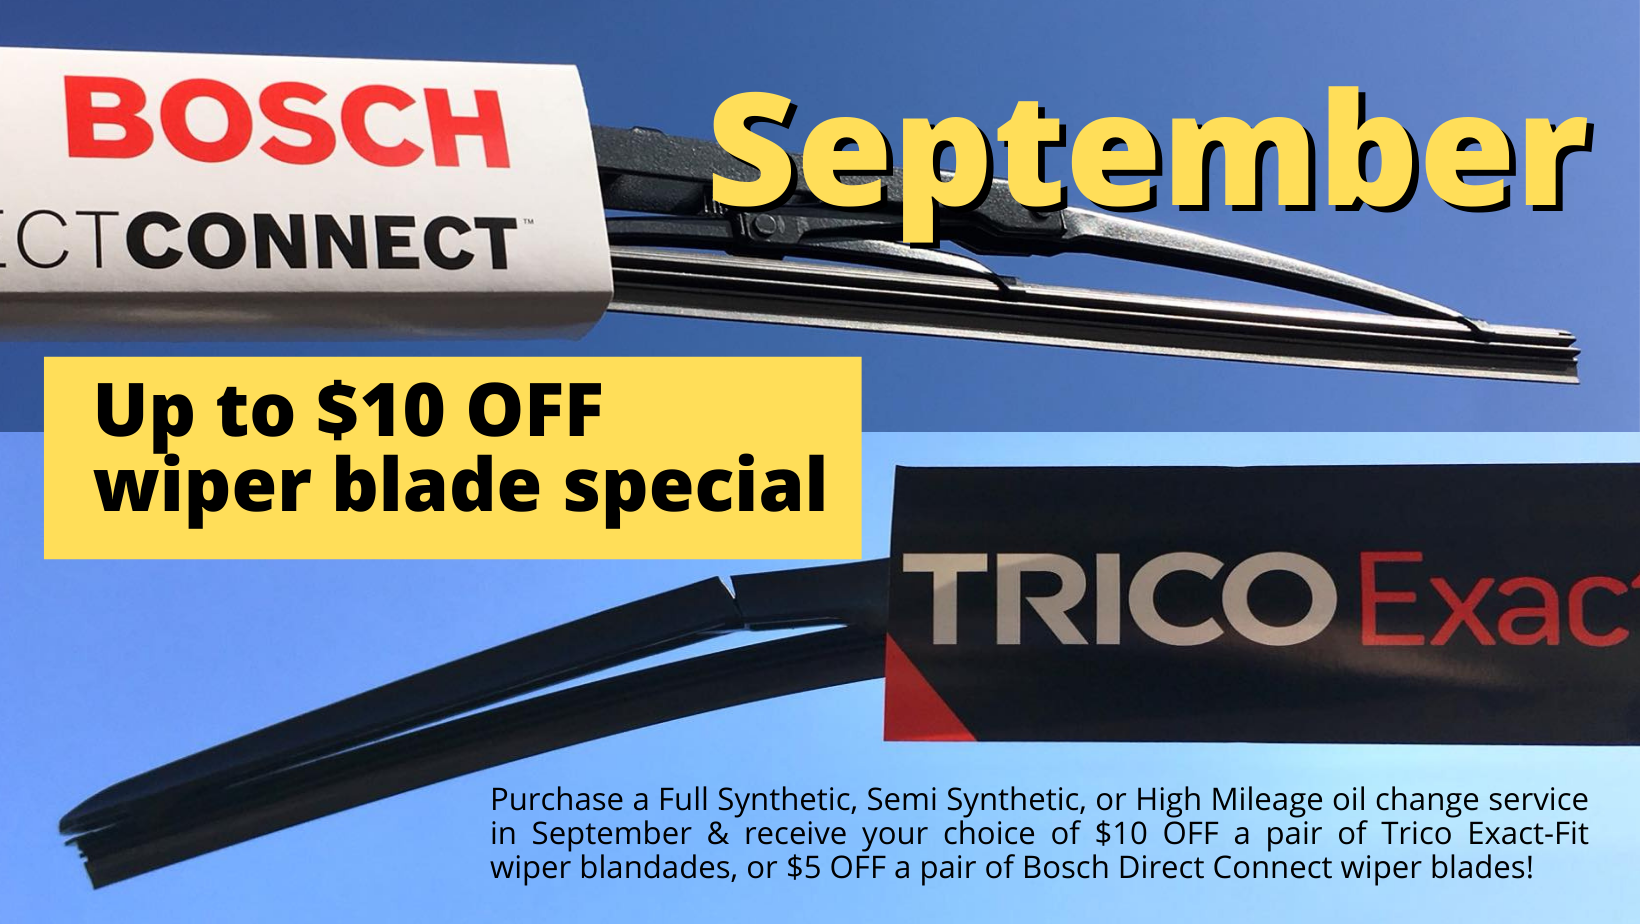 Purchase a Full Synthetic, Semi Synthetic, or High Mileage oil change service in September & receive your choice of $10 OFF a pair of Trico Exact-Fit wiper blandades, or $5 OFF a pair of Bosch Direct Connect wiper blades!